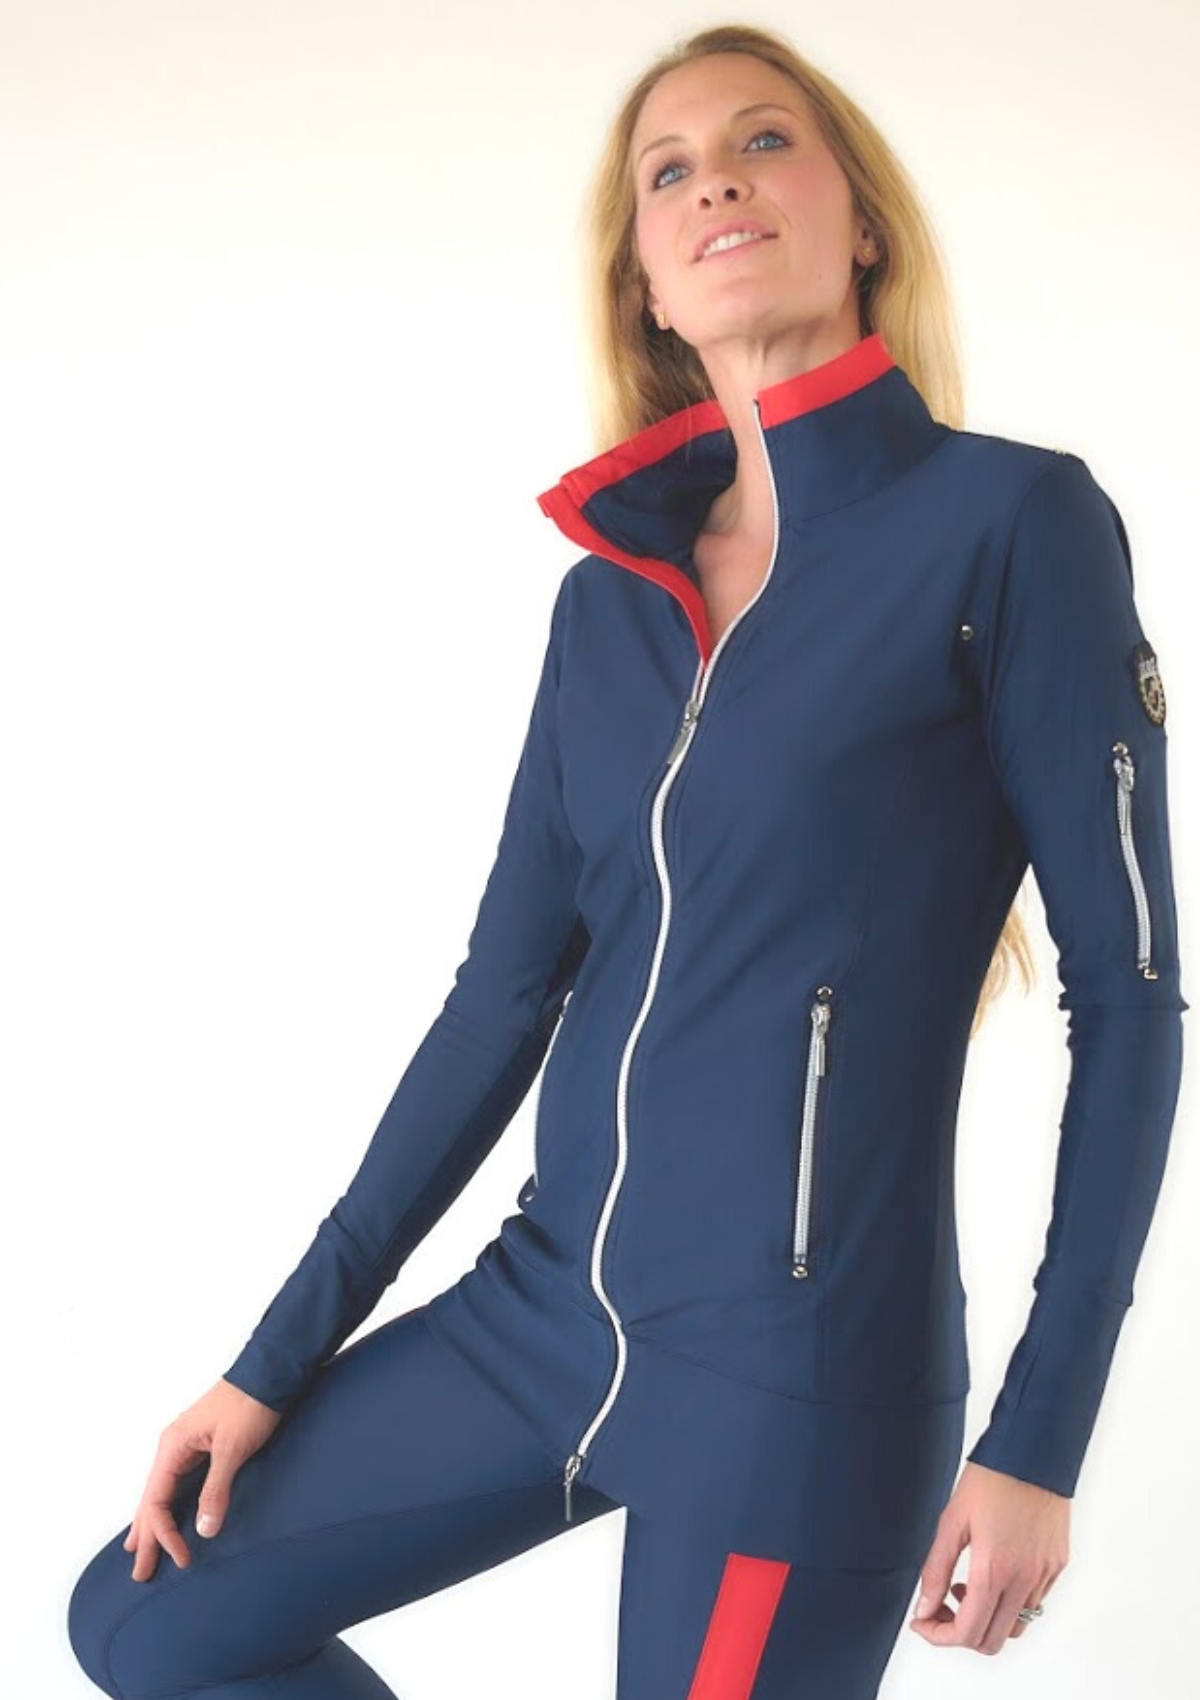 Woman athlete posing in navy full-zip jacket with red trim at neckline